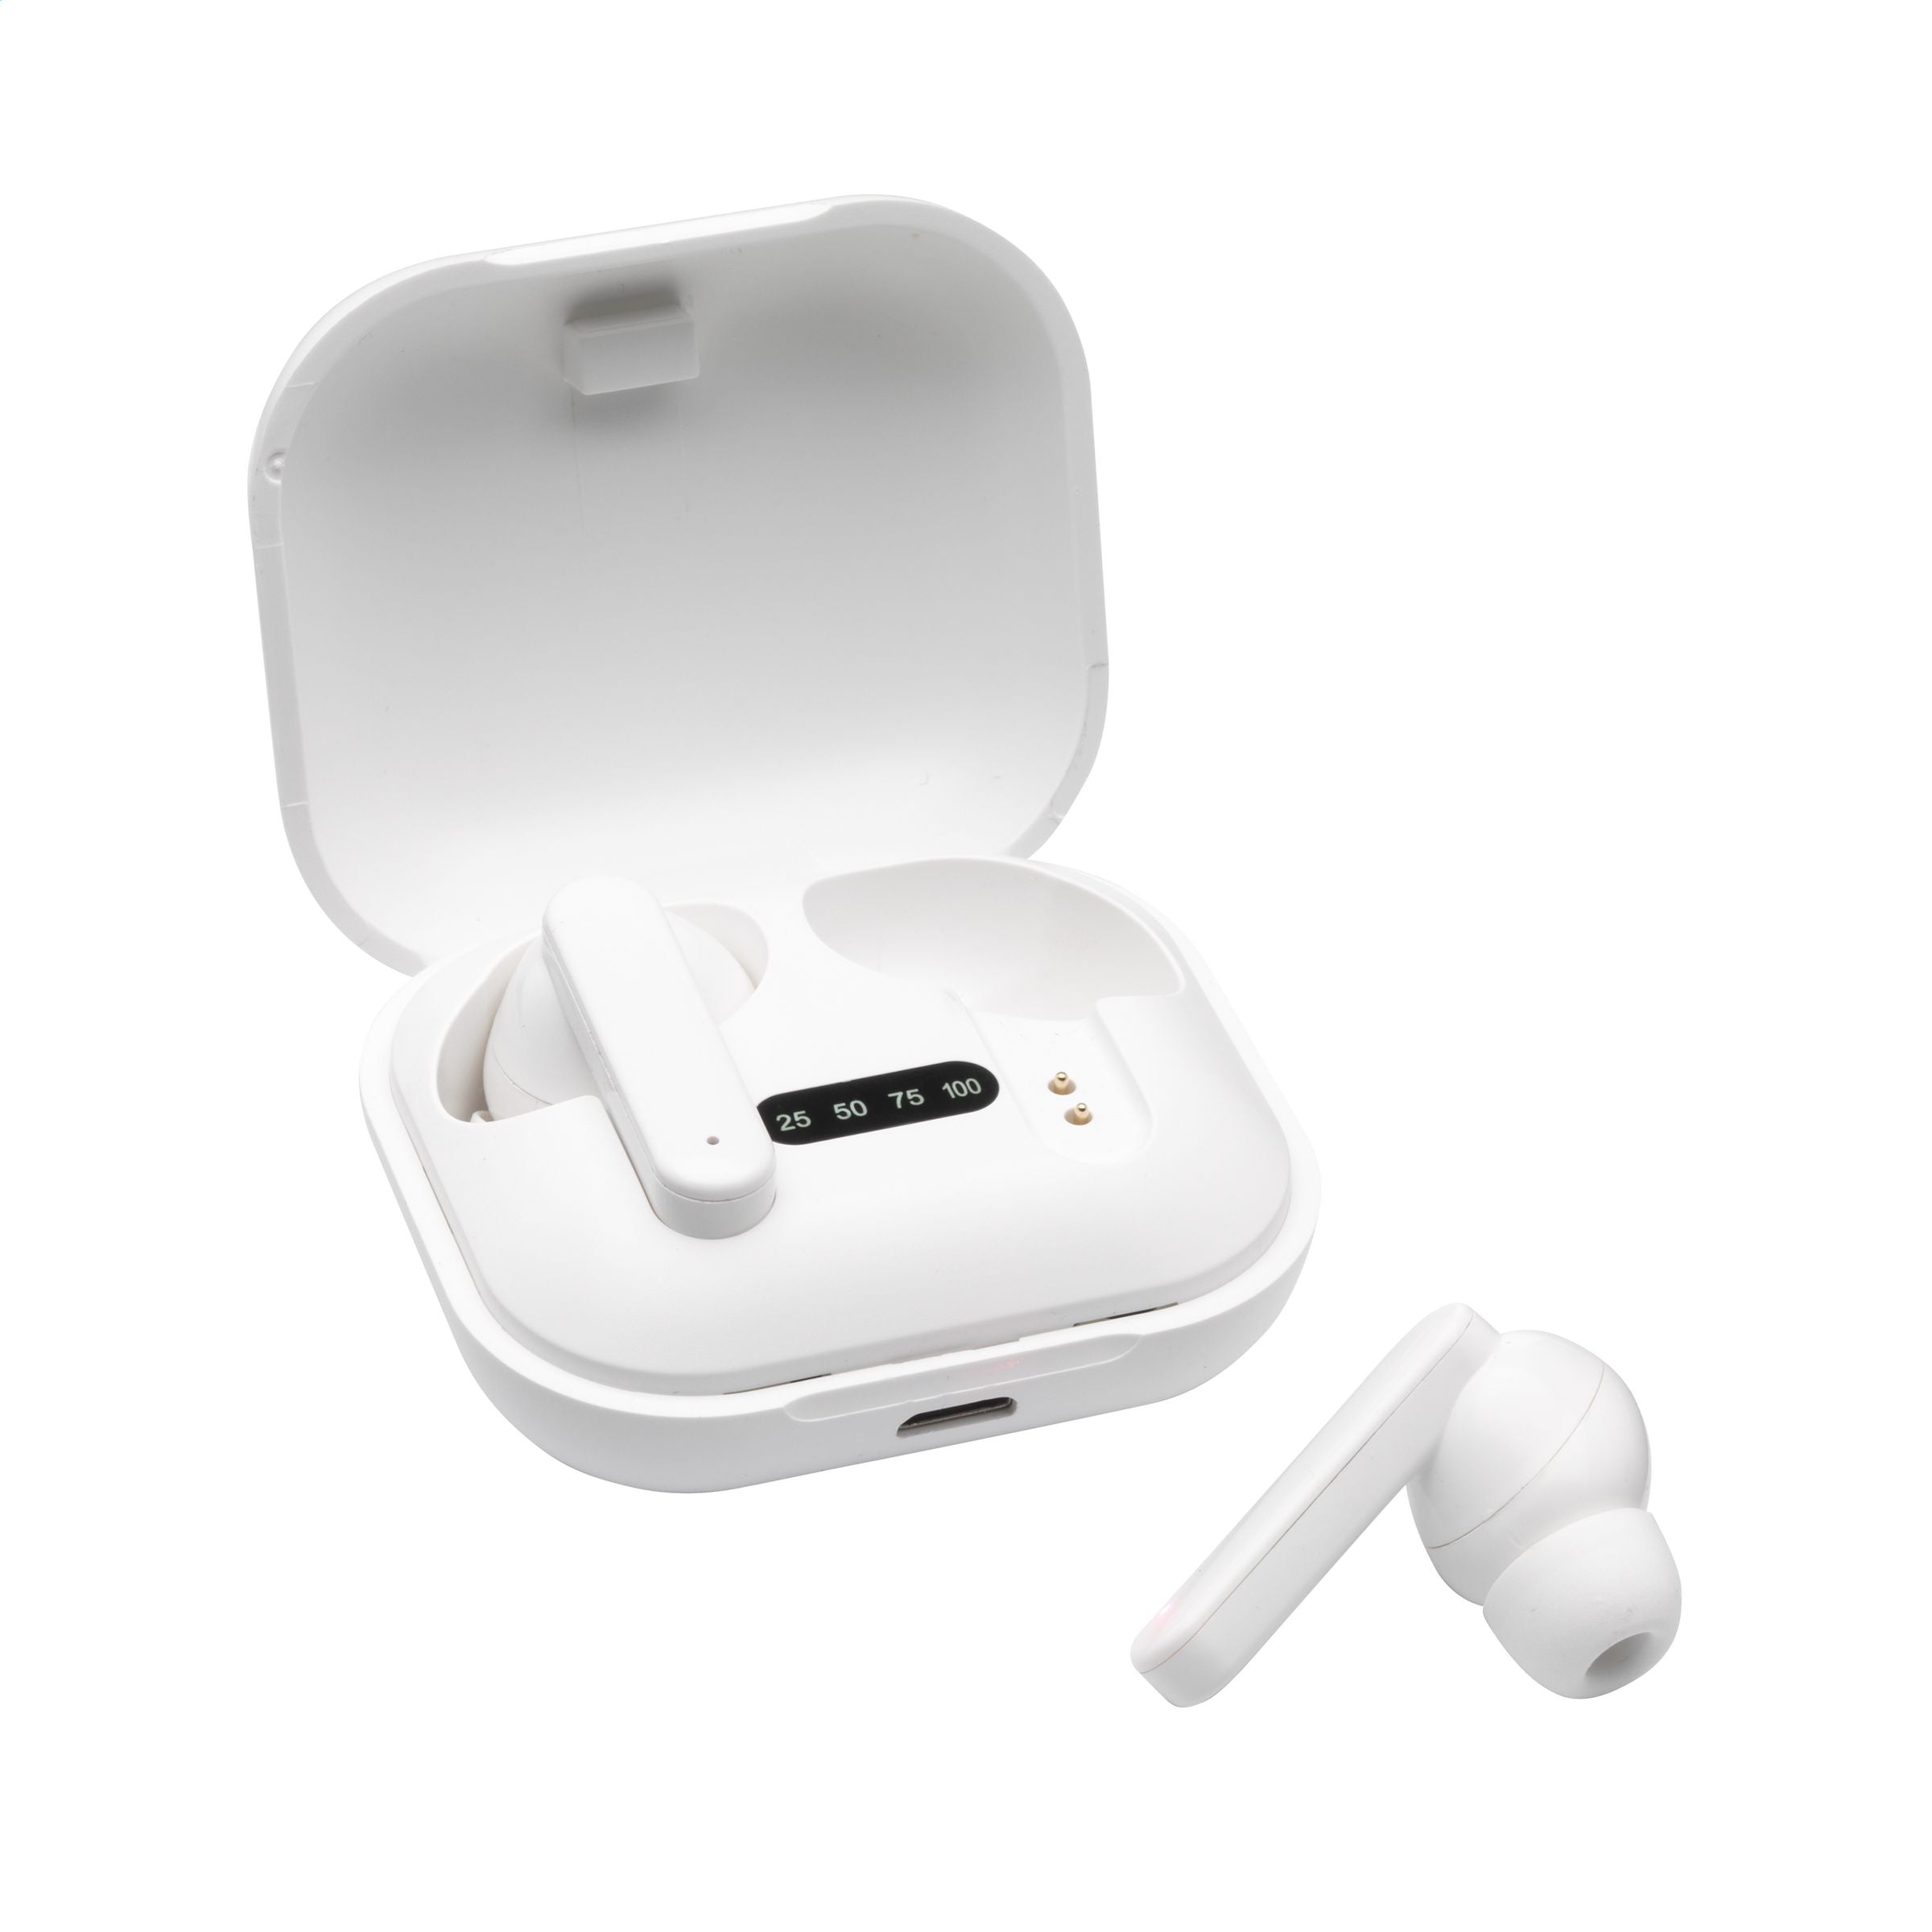 Aron TWS Wireless Earbuds in Charging Case - From £17.00